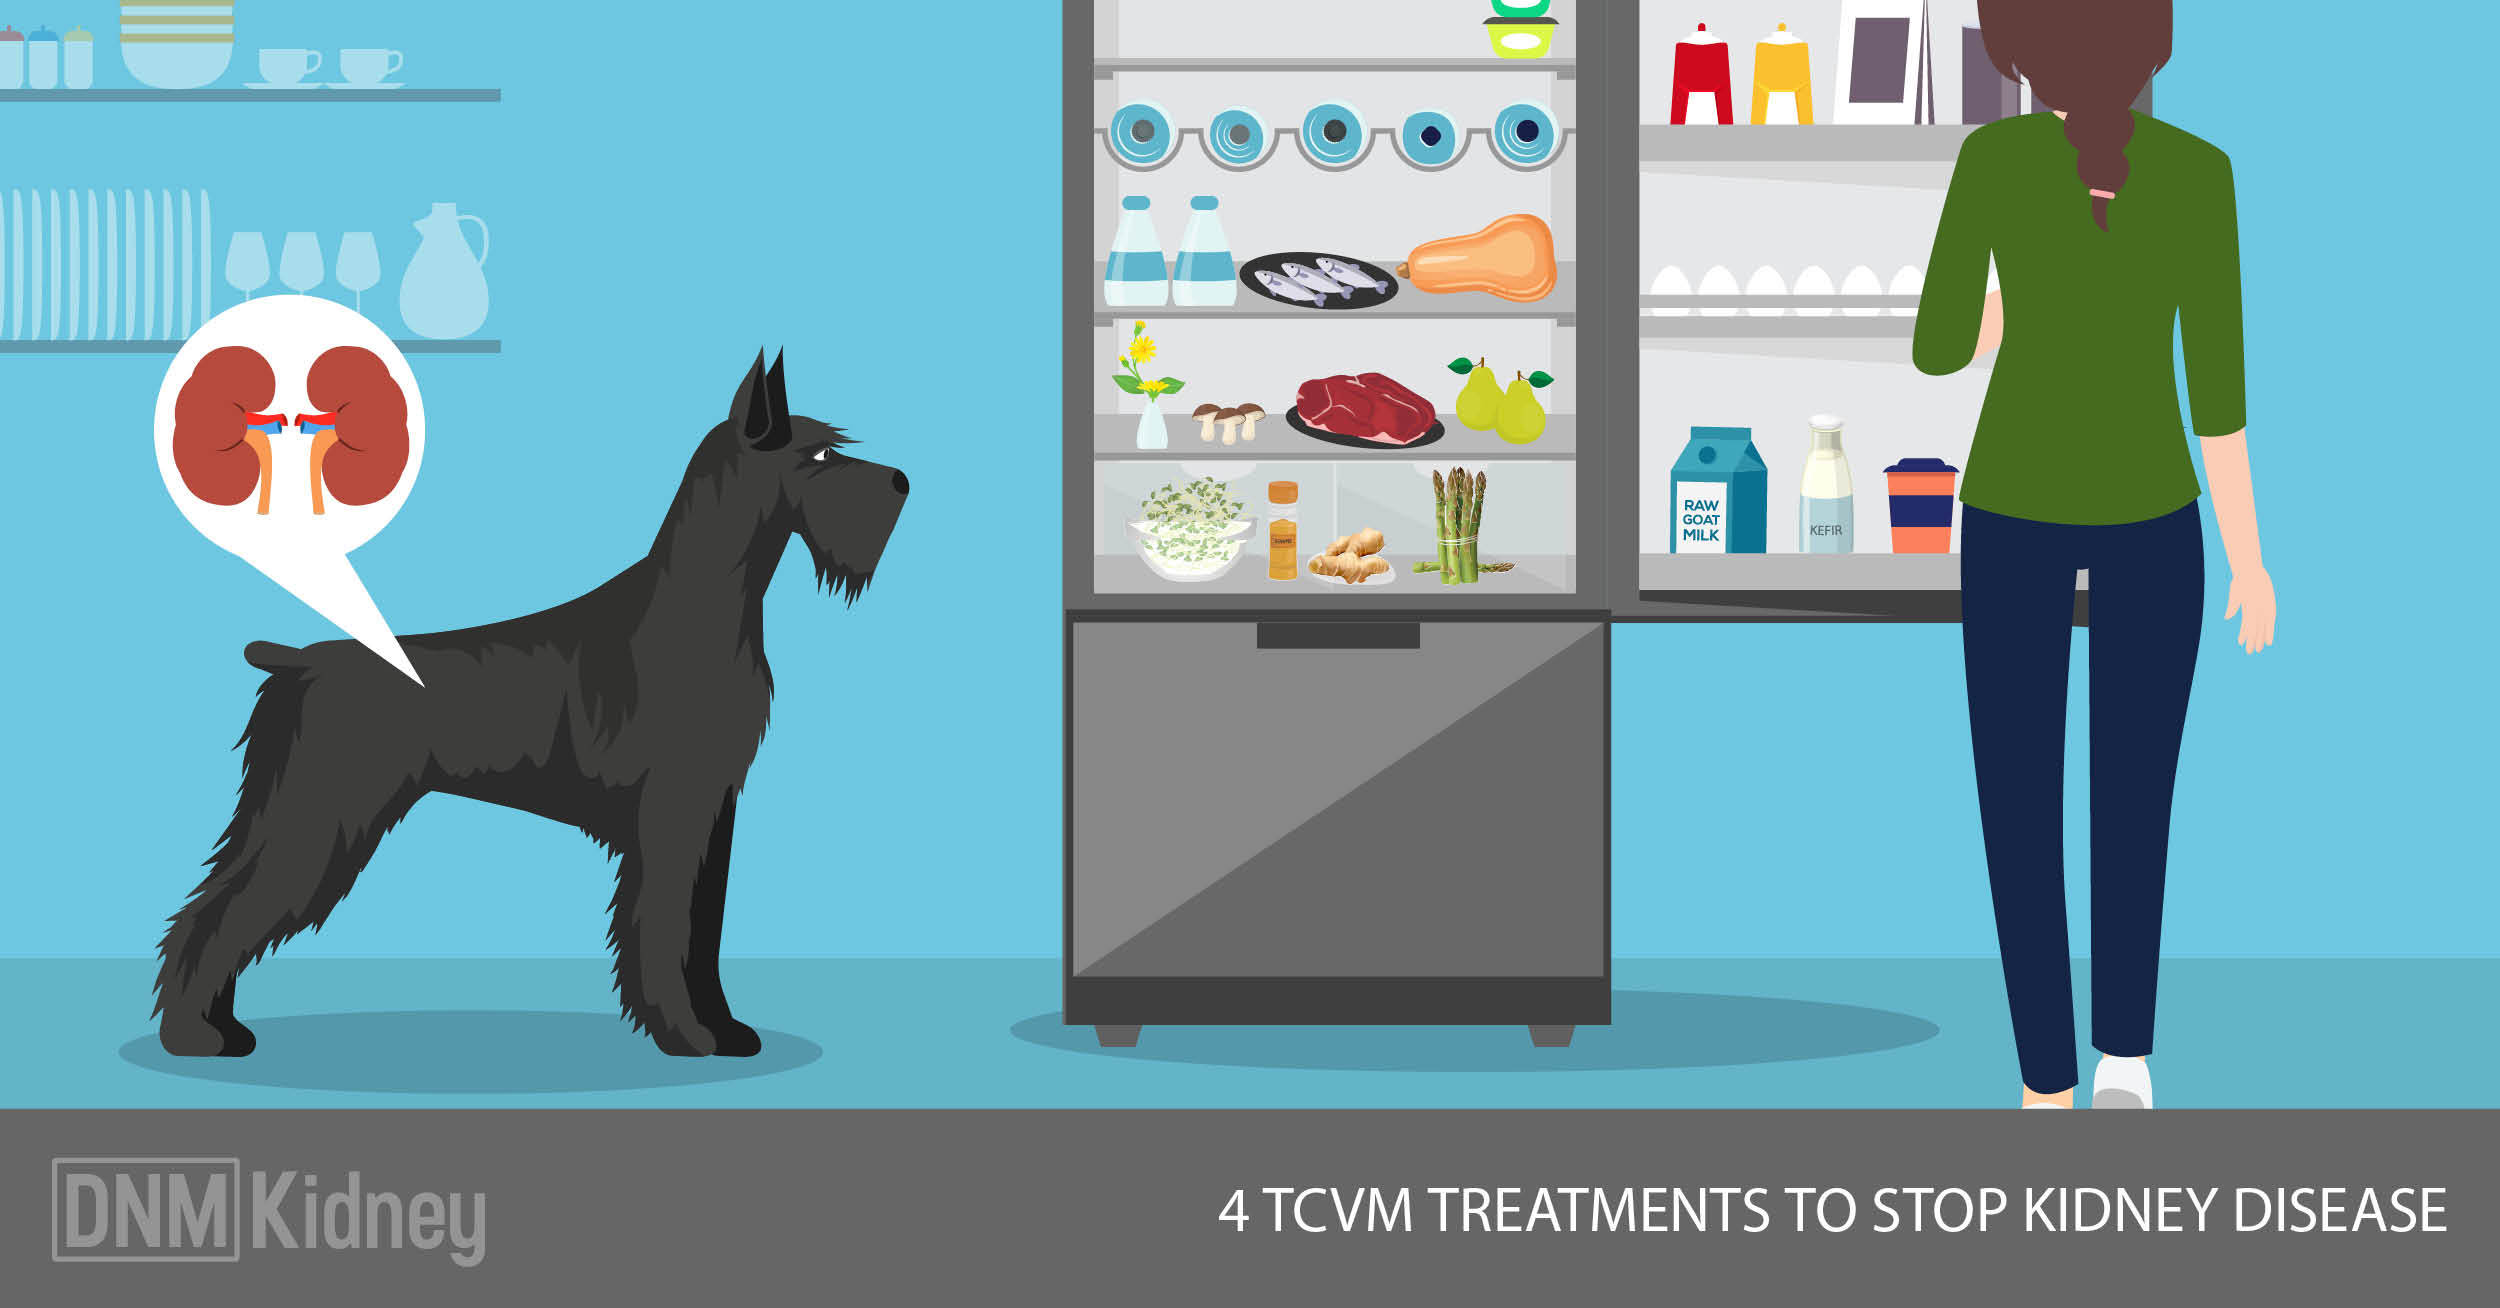 TCVM Treatment For Kidney Disease In Dogs